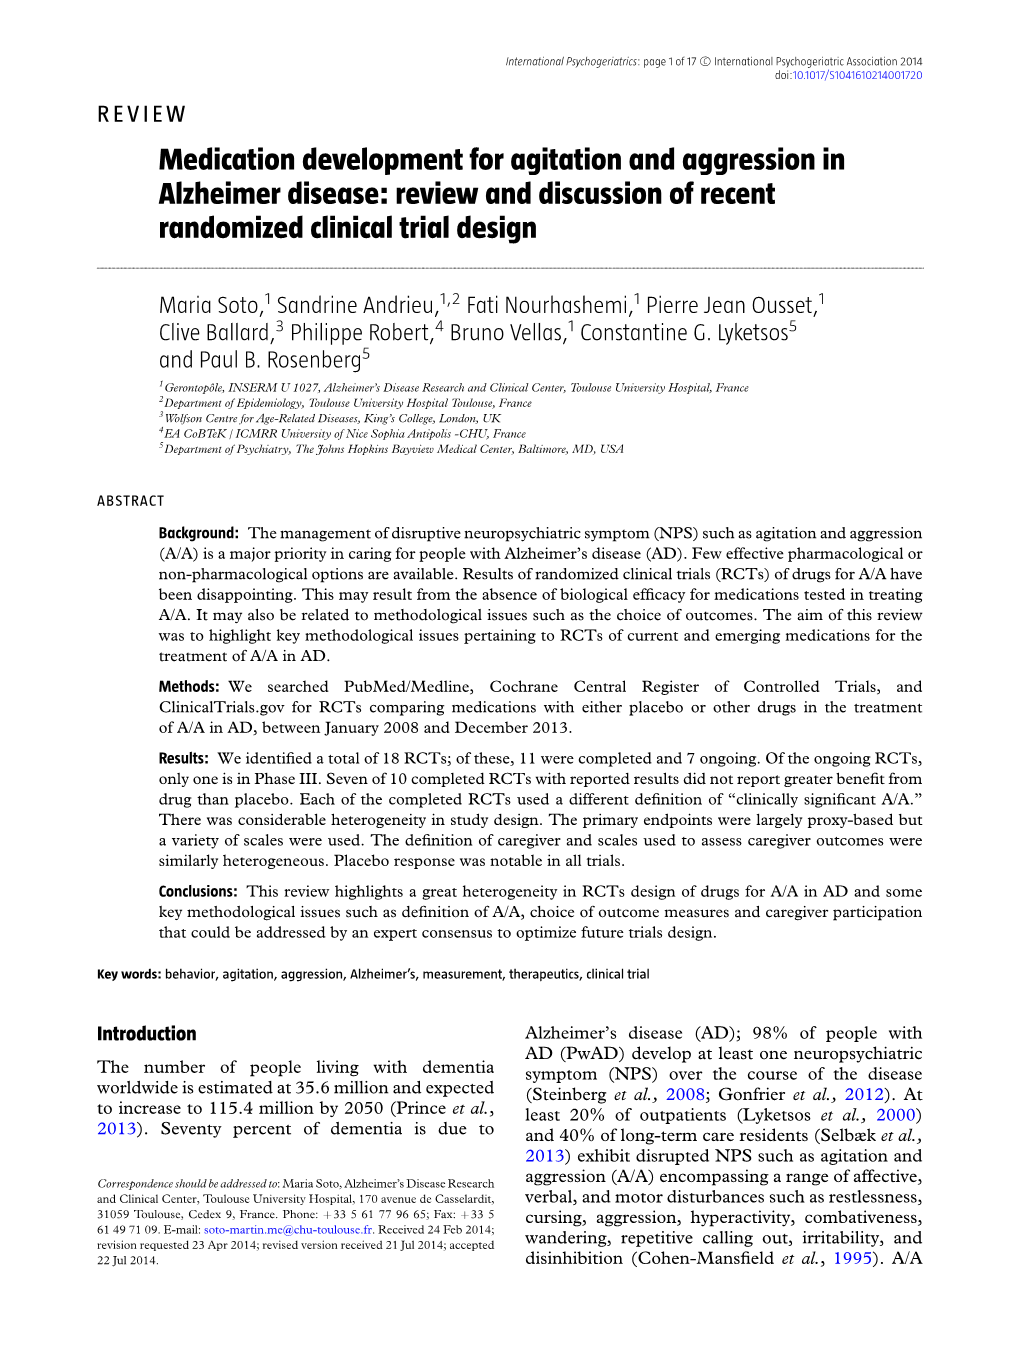 Medication Development for Agitation and Aggression in Alzheimer Disease: Review and Discussion of Recent Randomized Clinical Trial Design